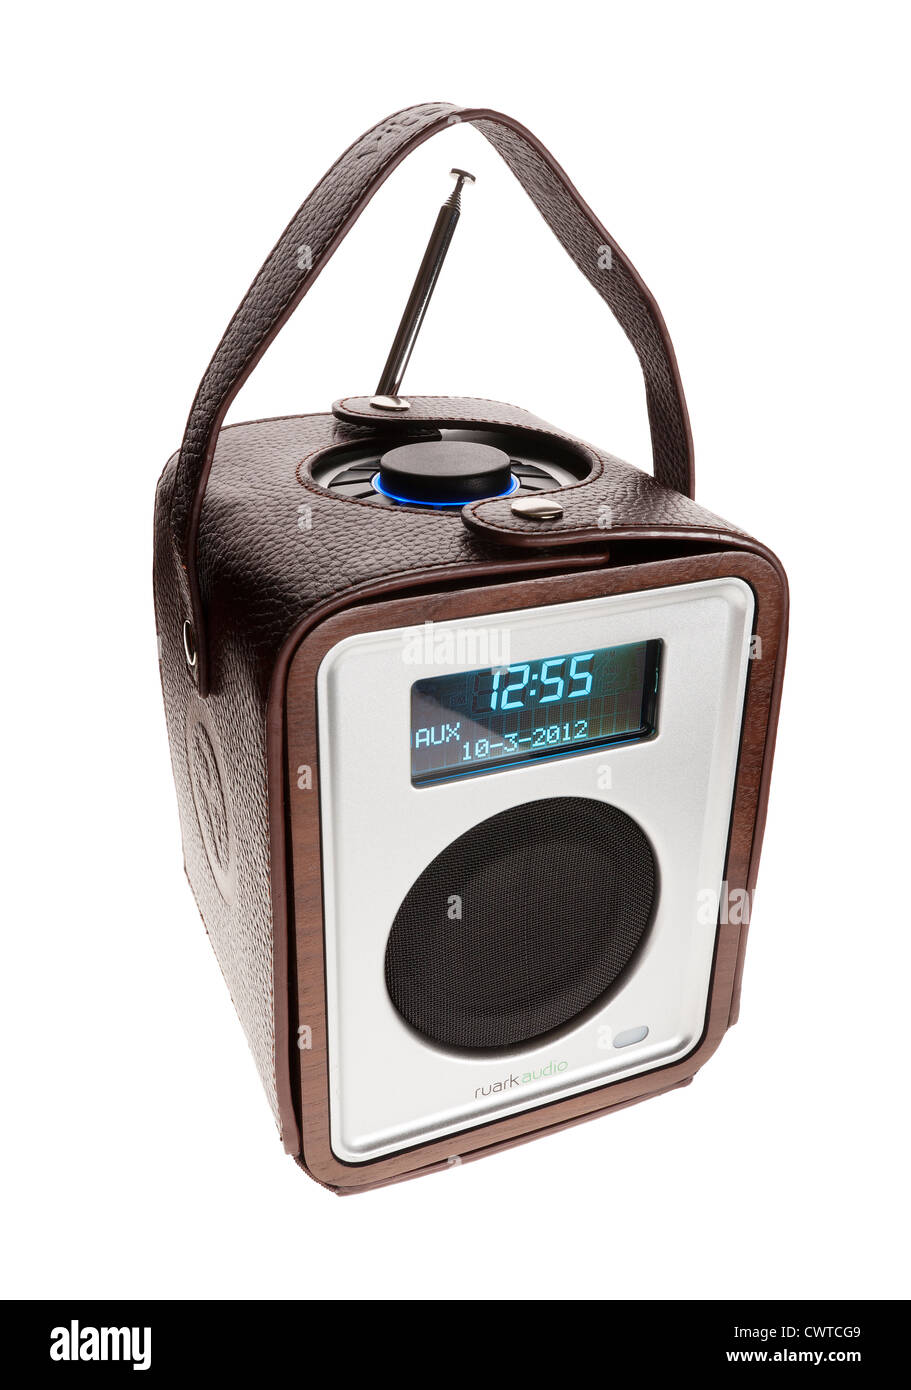 Ruark Audio deluxe tabletop radio, R1 with a leather case Stock Photo -  Alamy